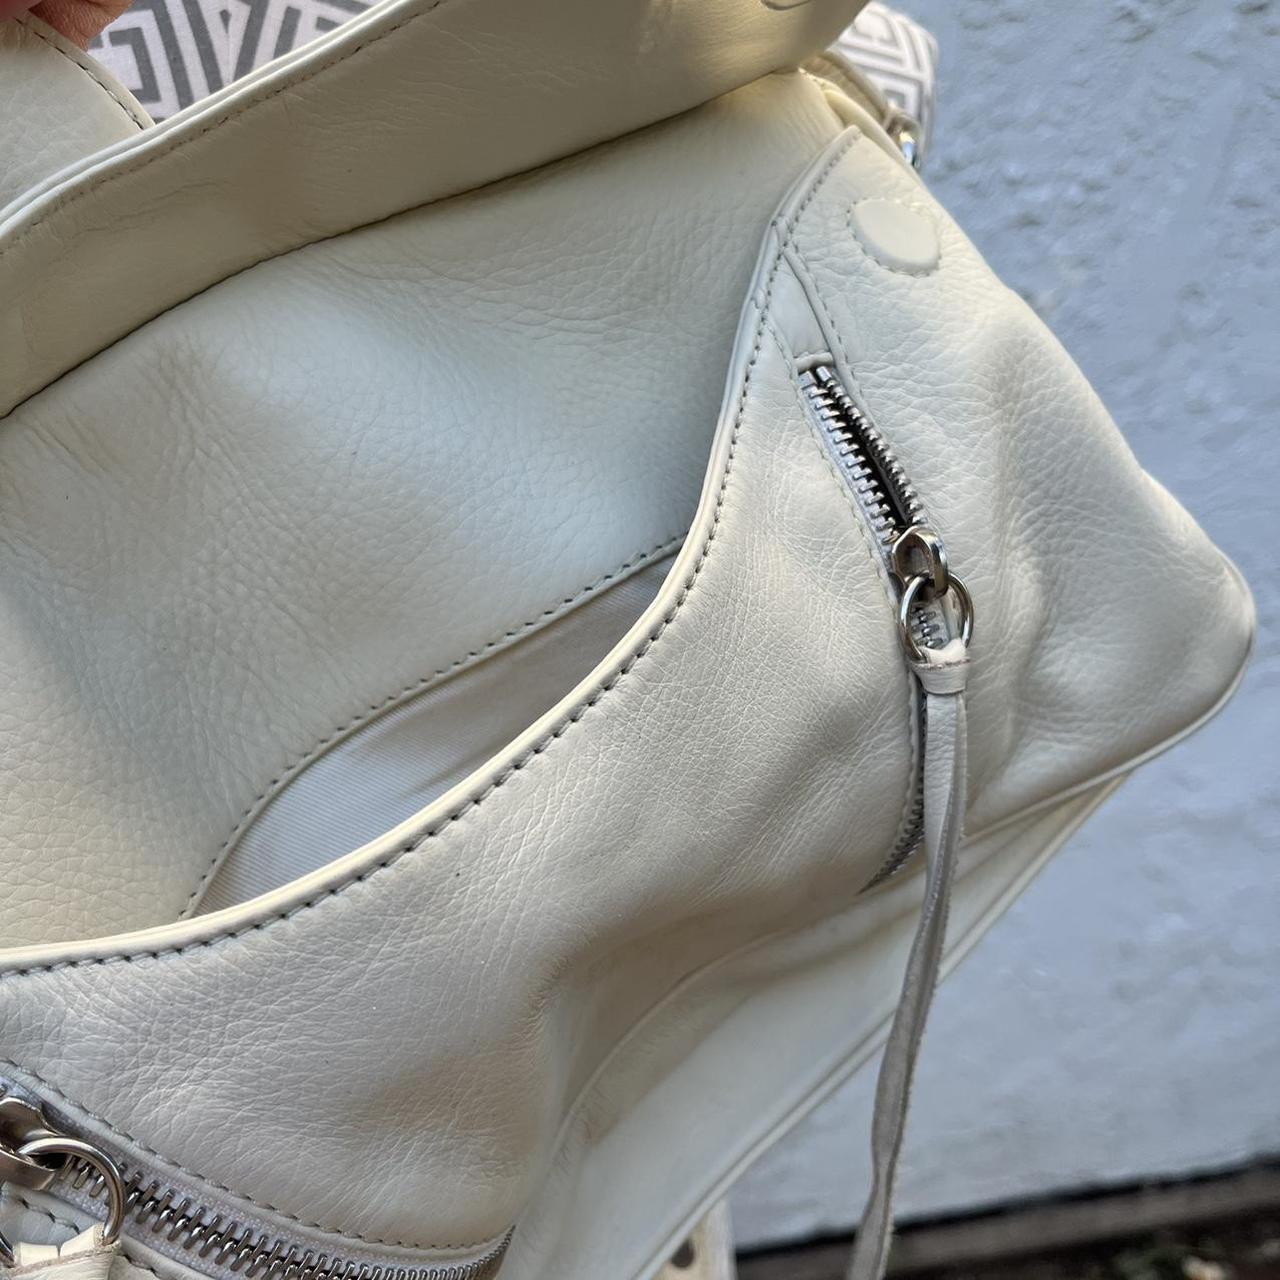 Botkier Women's White and Silver Bag (2)